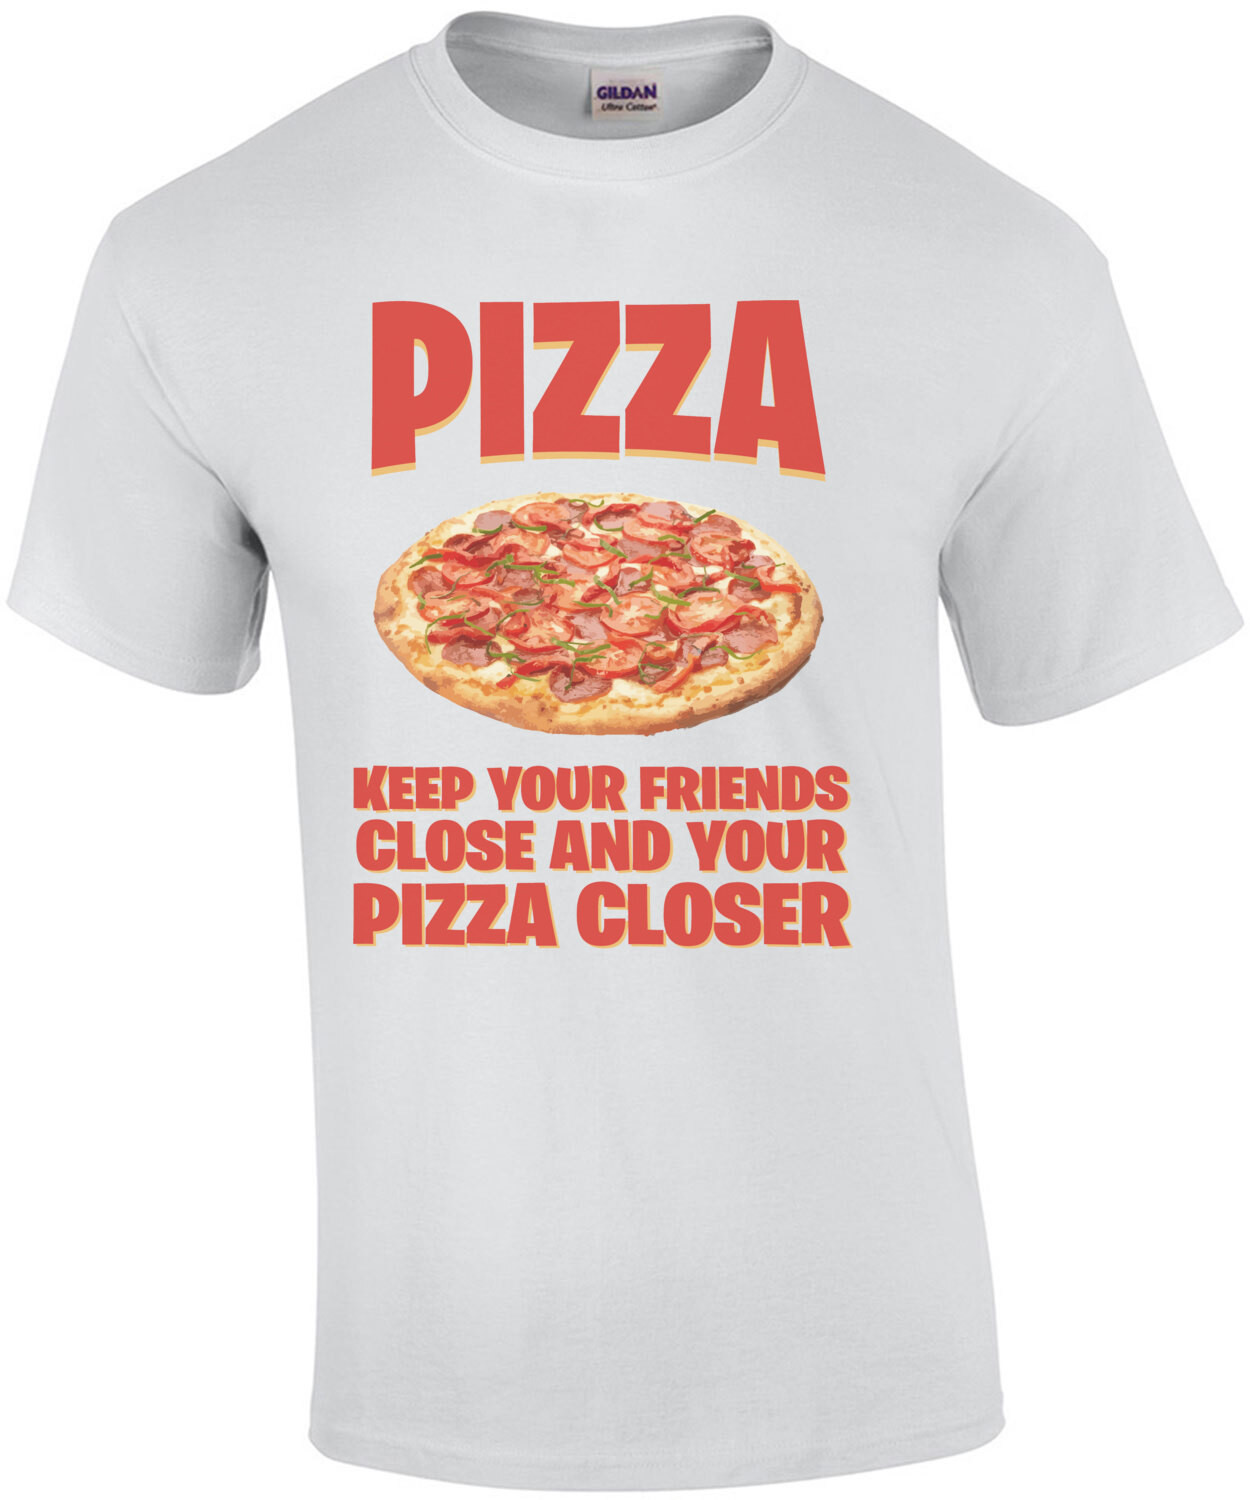 Keep your friends close and your pizza closer - funny pizza t-shirt